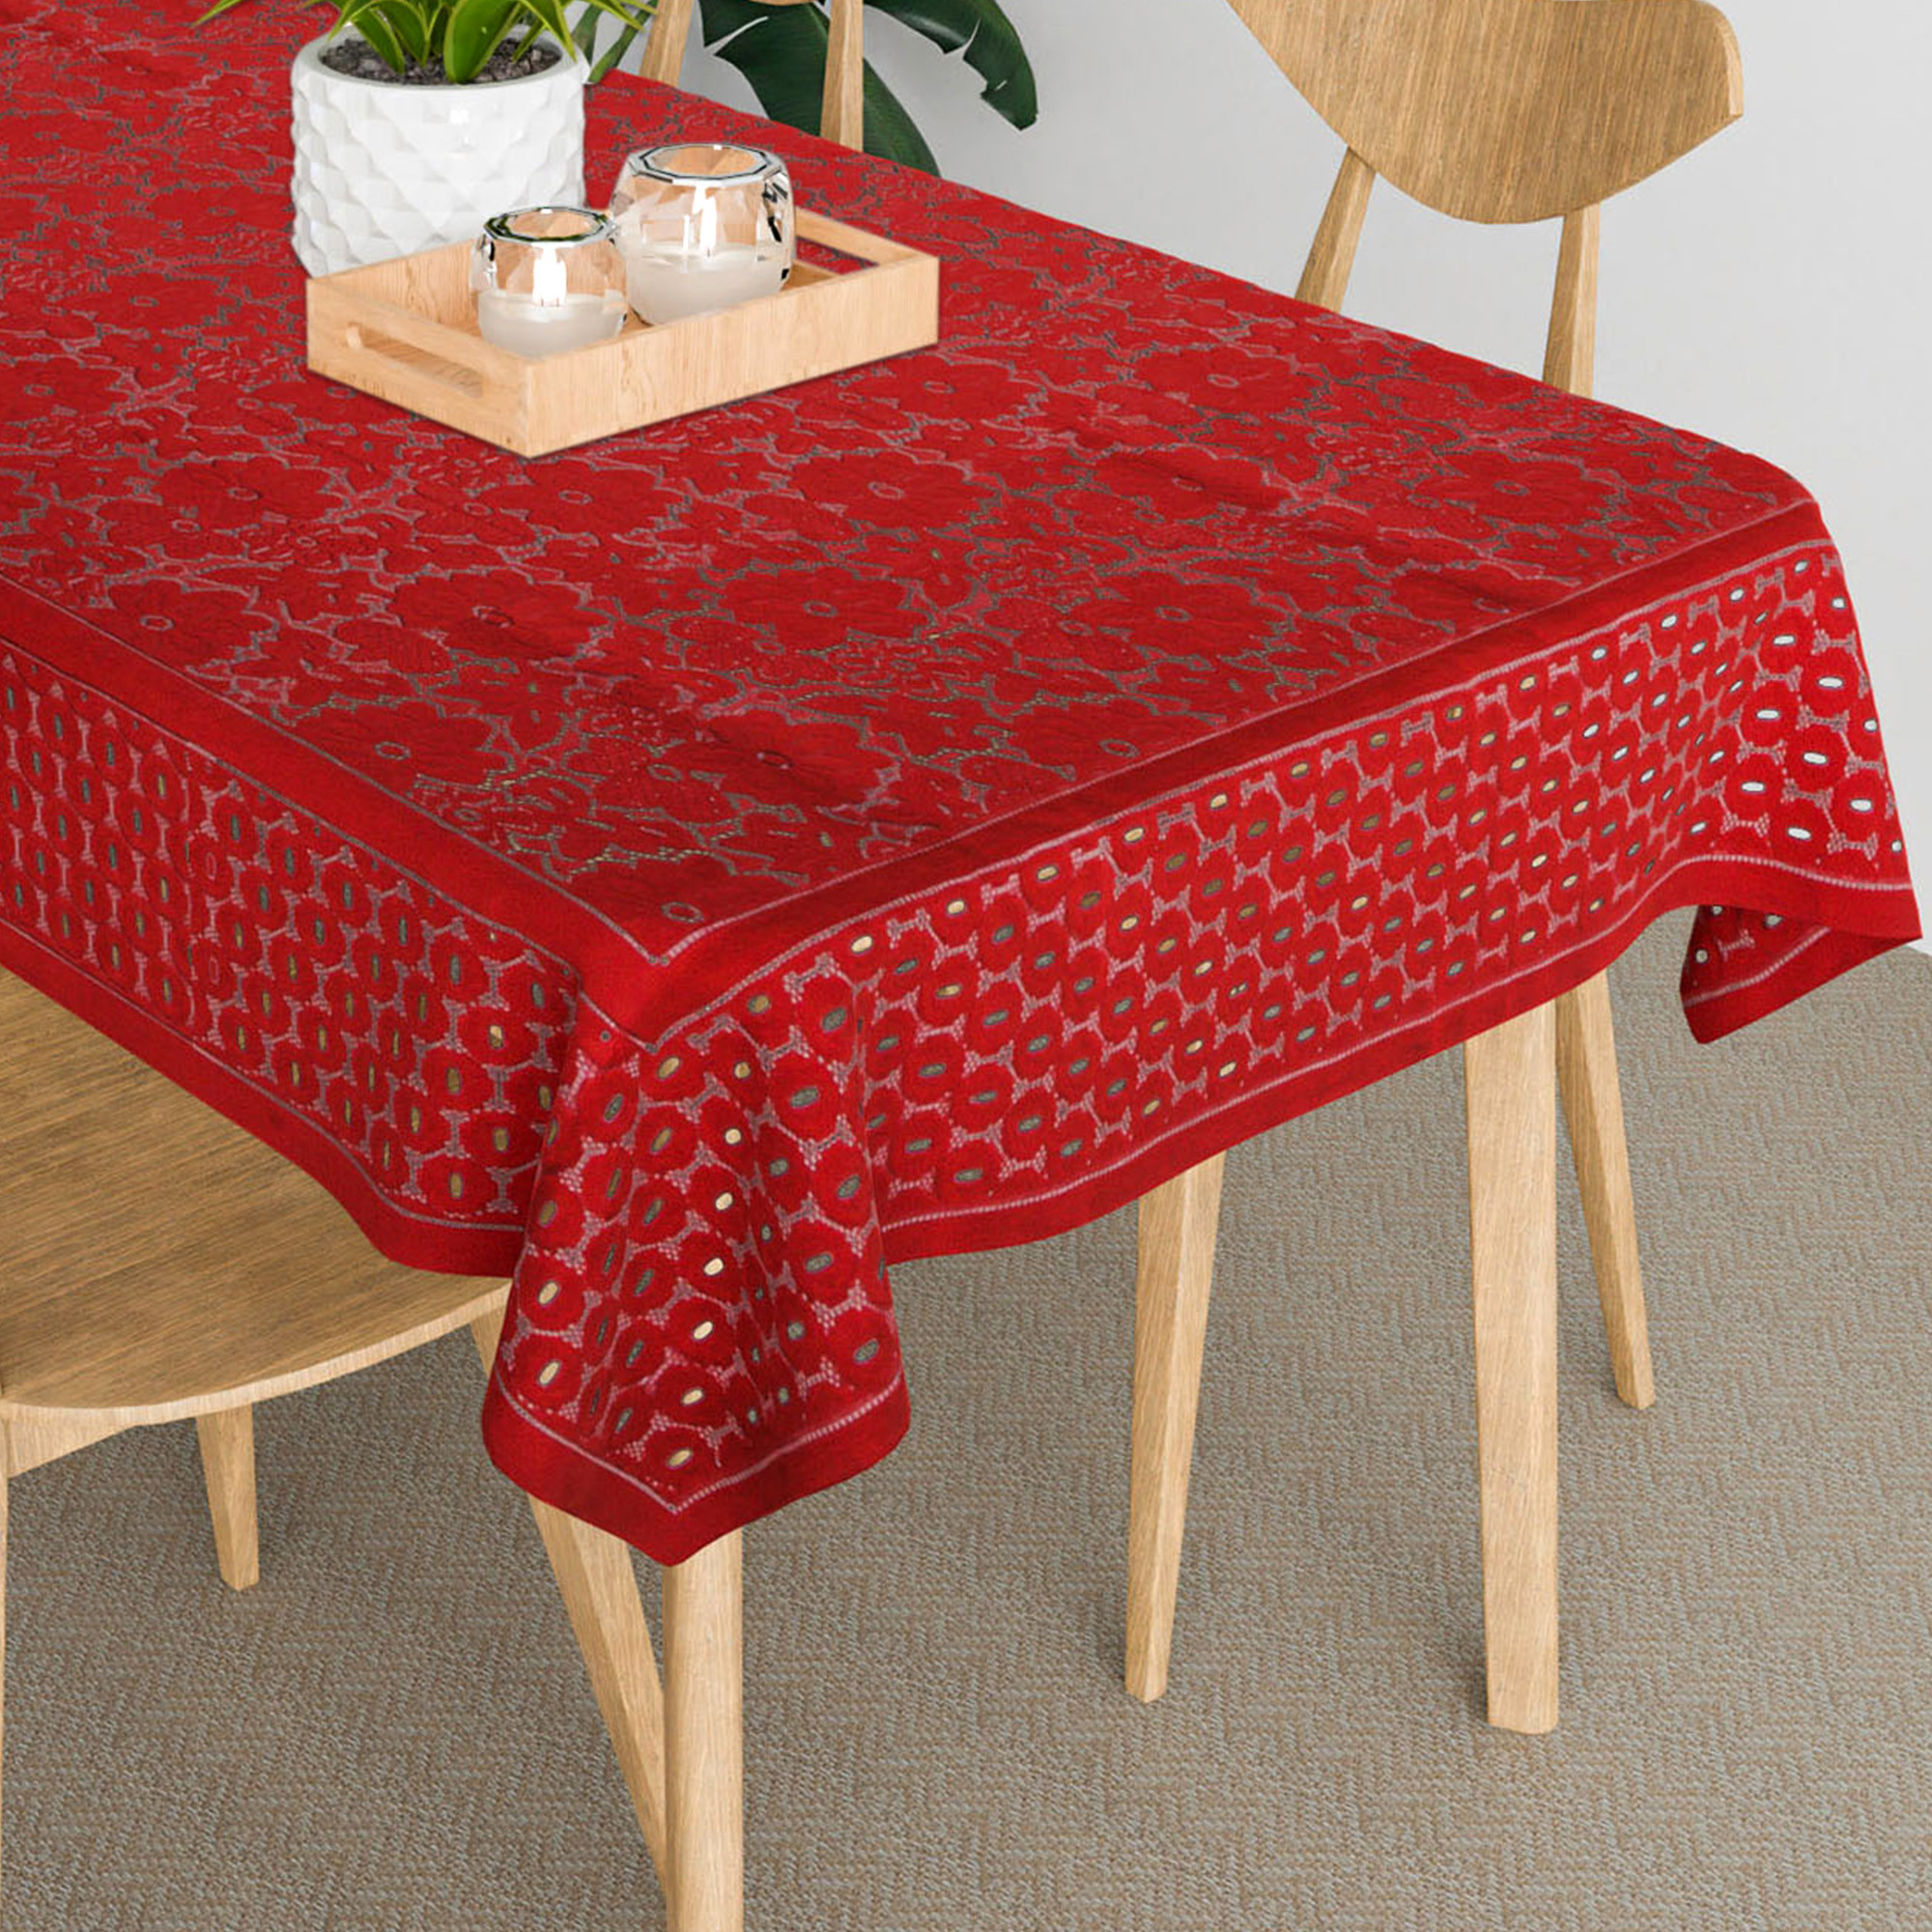 Kuber Industries Table Cover | Net Tabletop Cover | Table Linen Cover | Table Cloth Cover | Table Cover for Kitchen | Table Cover for Hall Décor | Self Flower Valley-Design | 45x70 Inch | Maroon